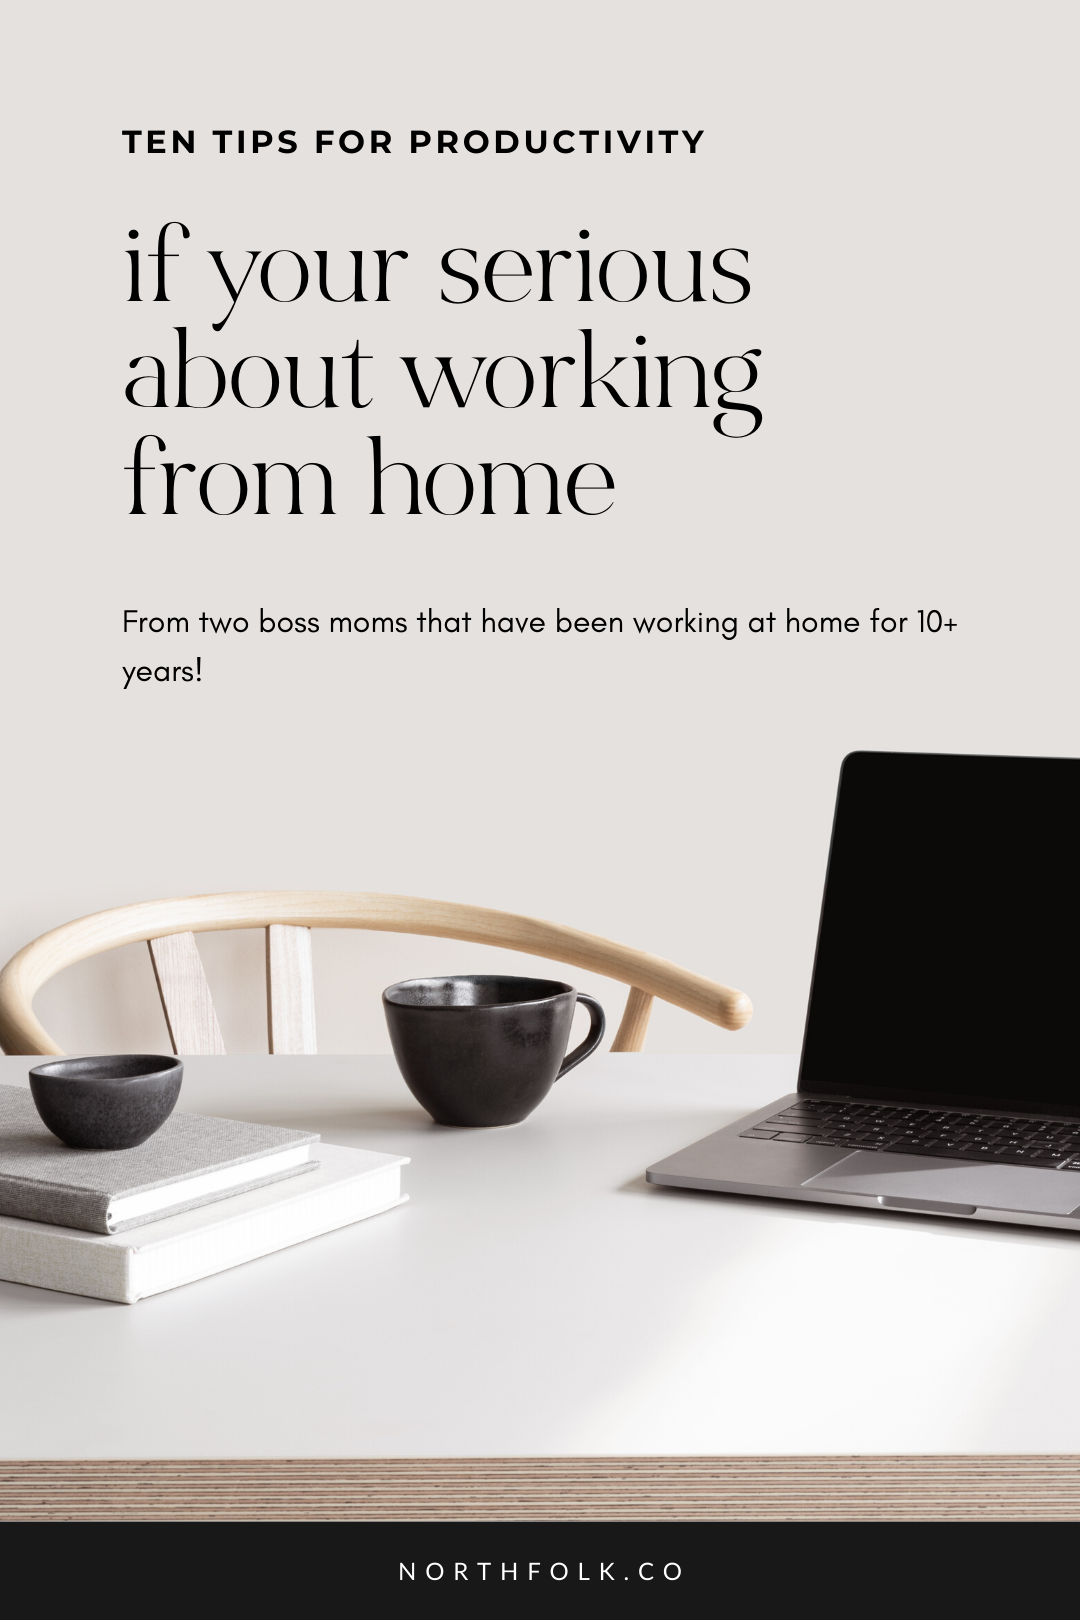 How To Work From Home: 10 Tips for productivity